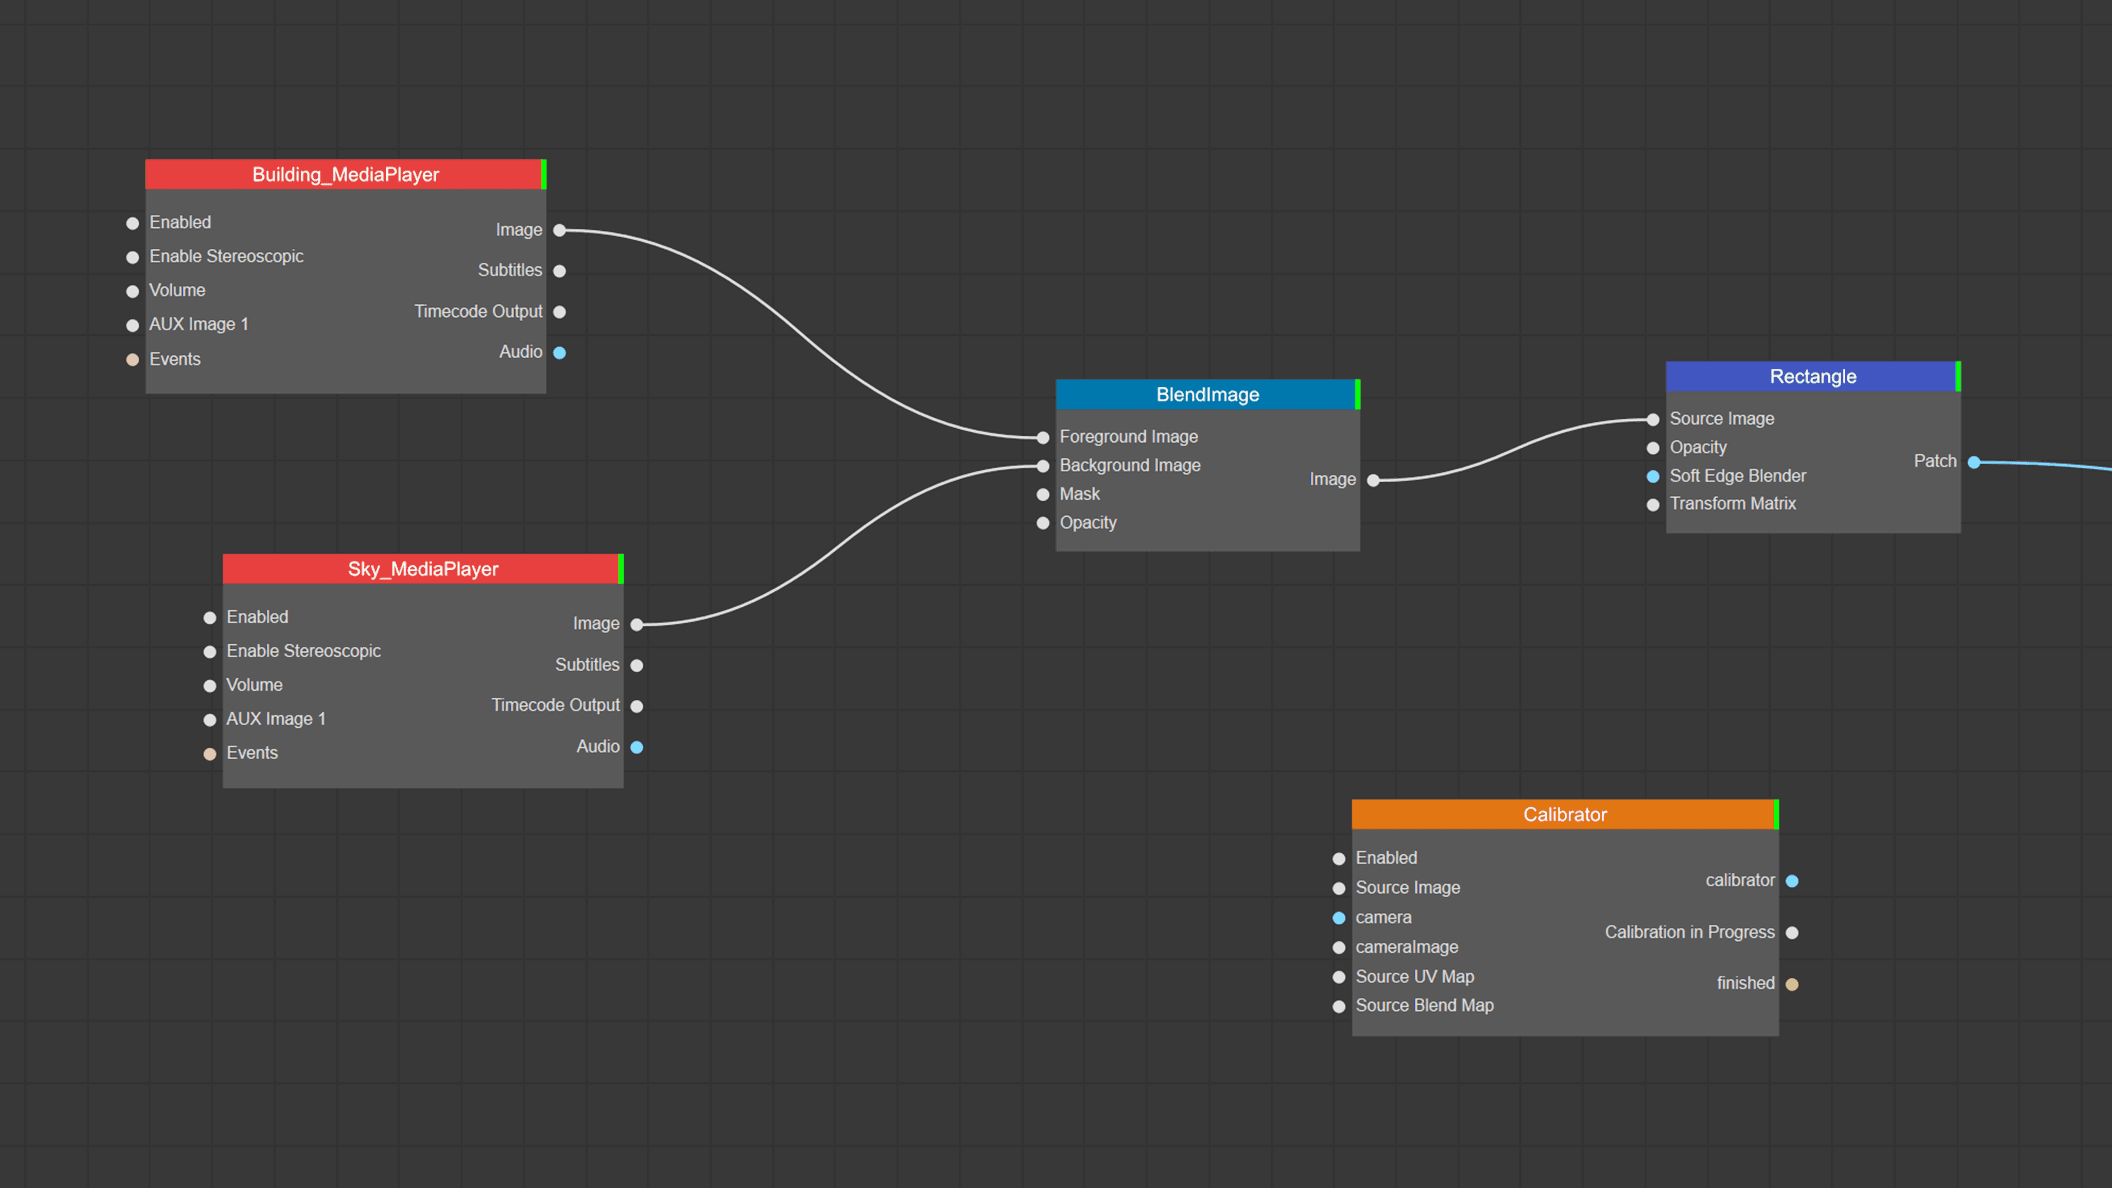 Screenberry interface featuring a node graph editor to demonstrate its advanced integration and automation capabilities